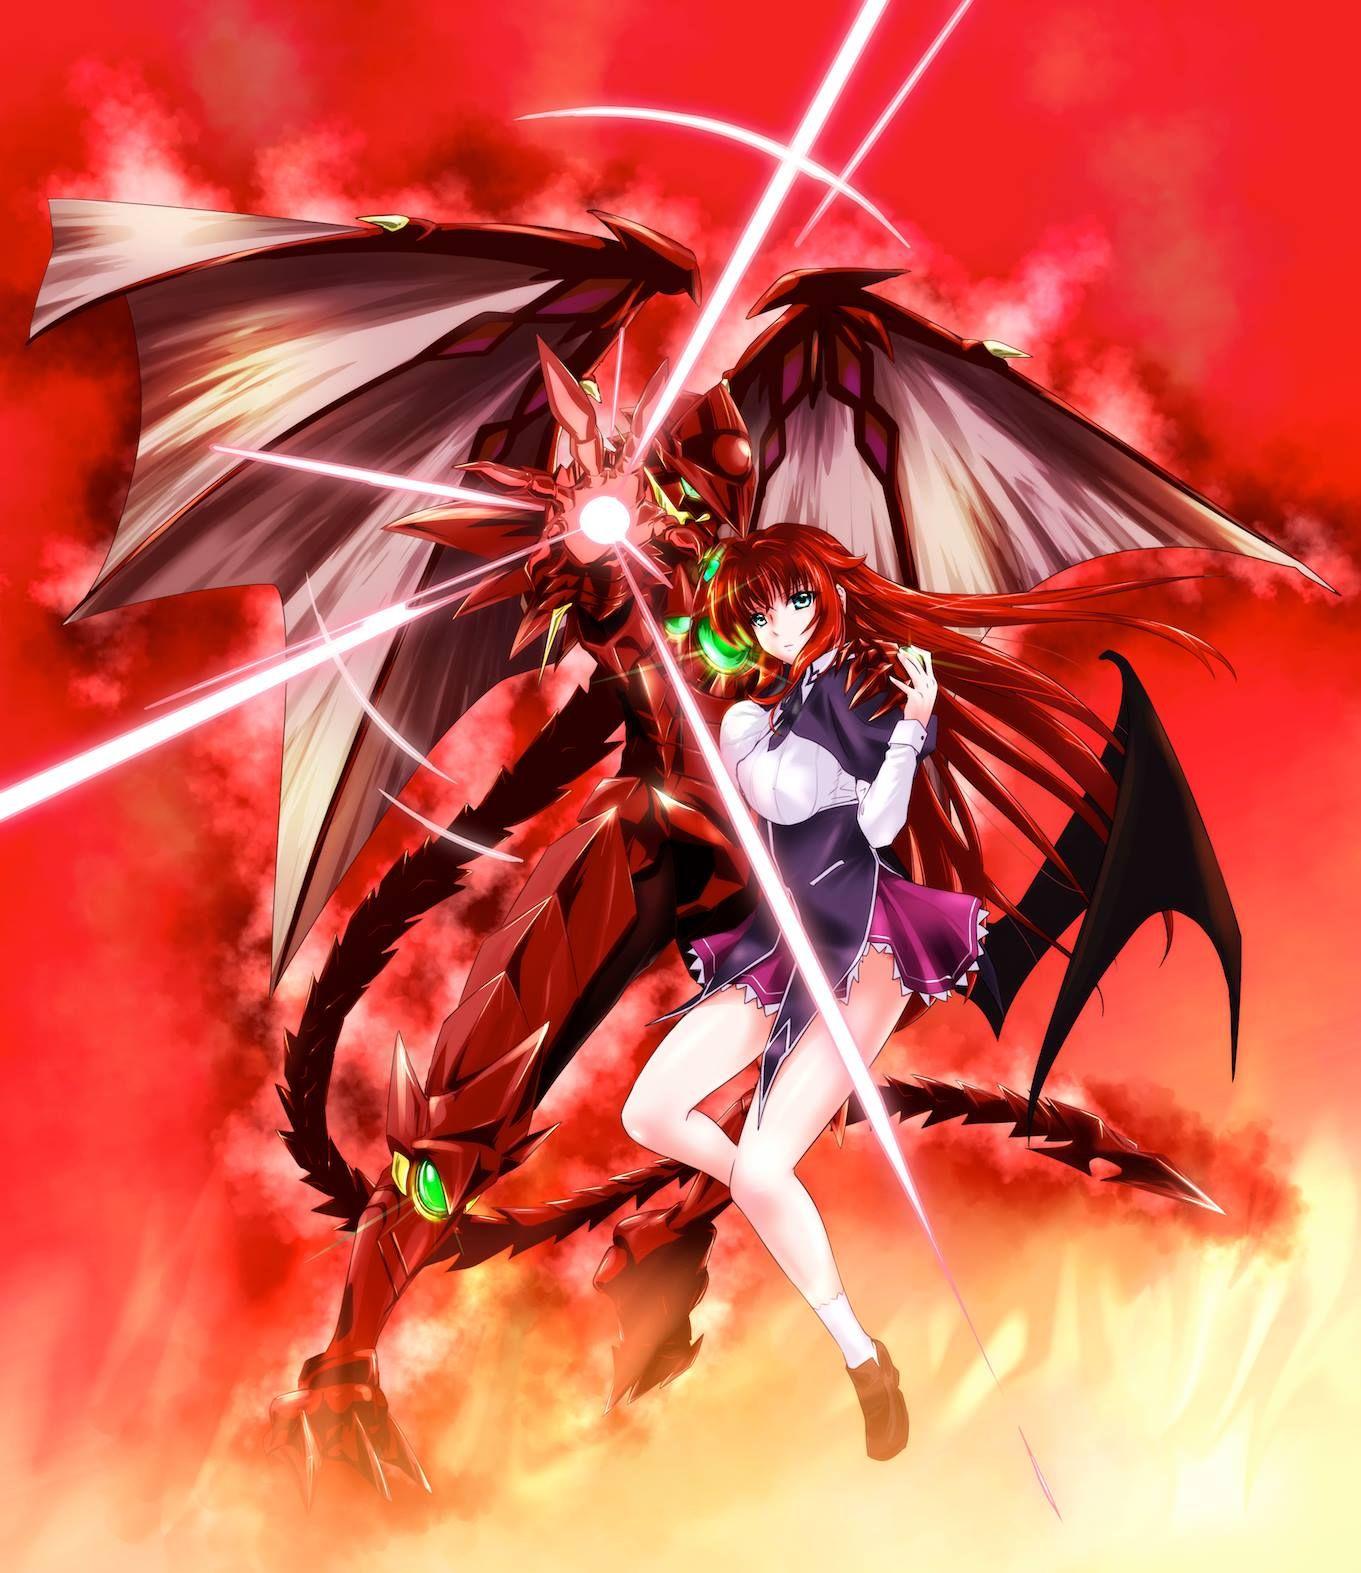 The Red Dragon Emperor & The Crimson Haired Empress. Anime